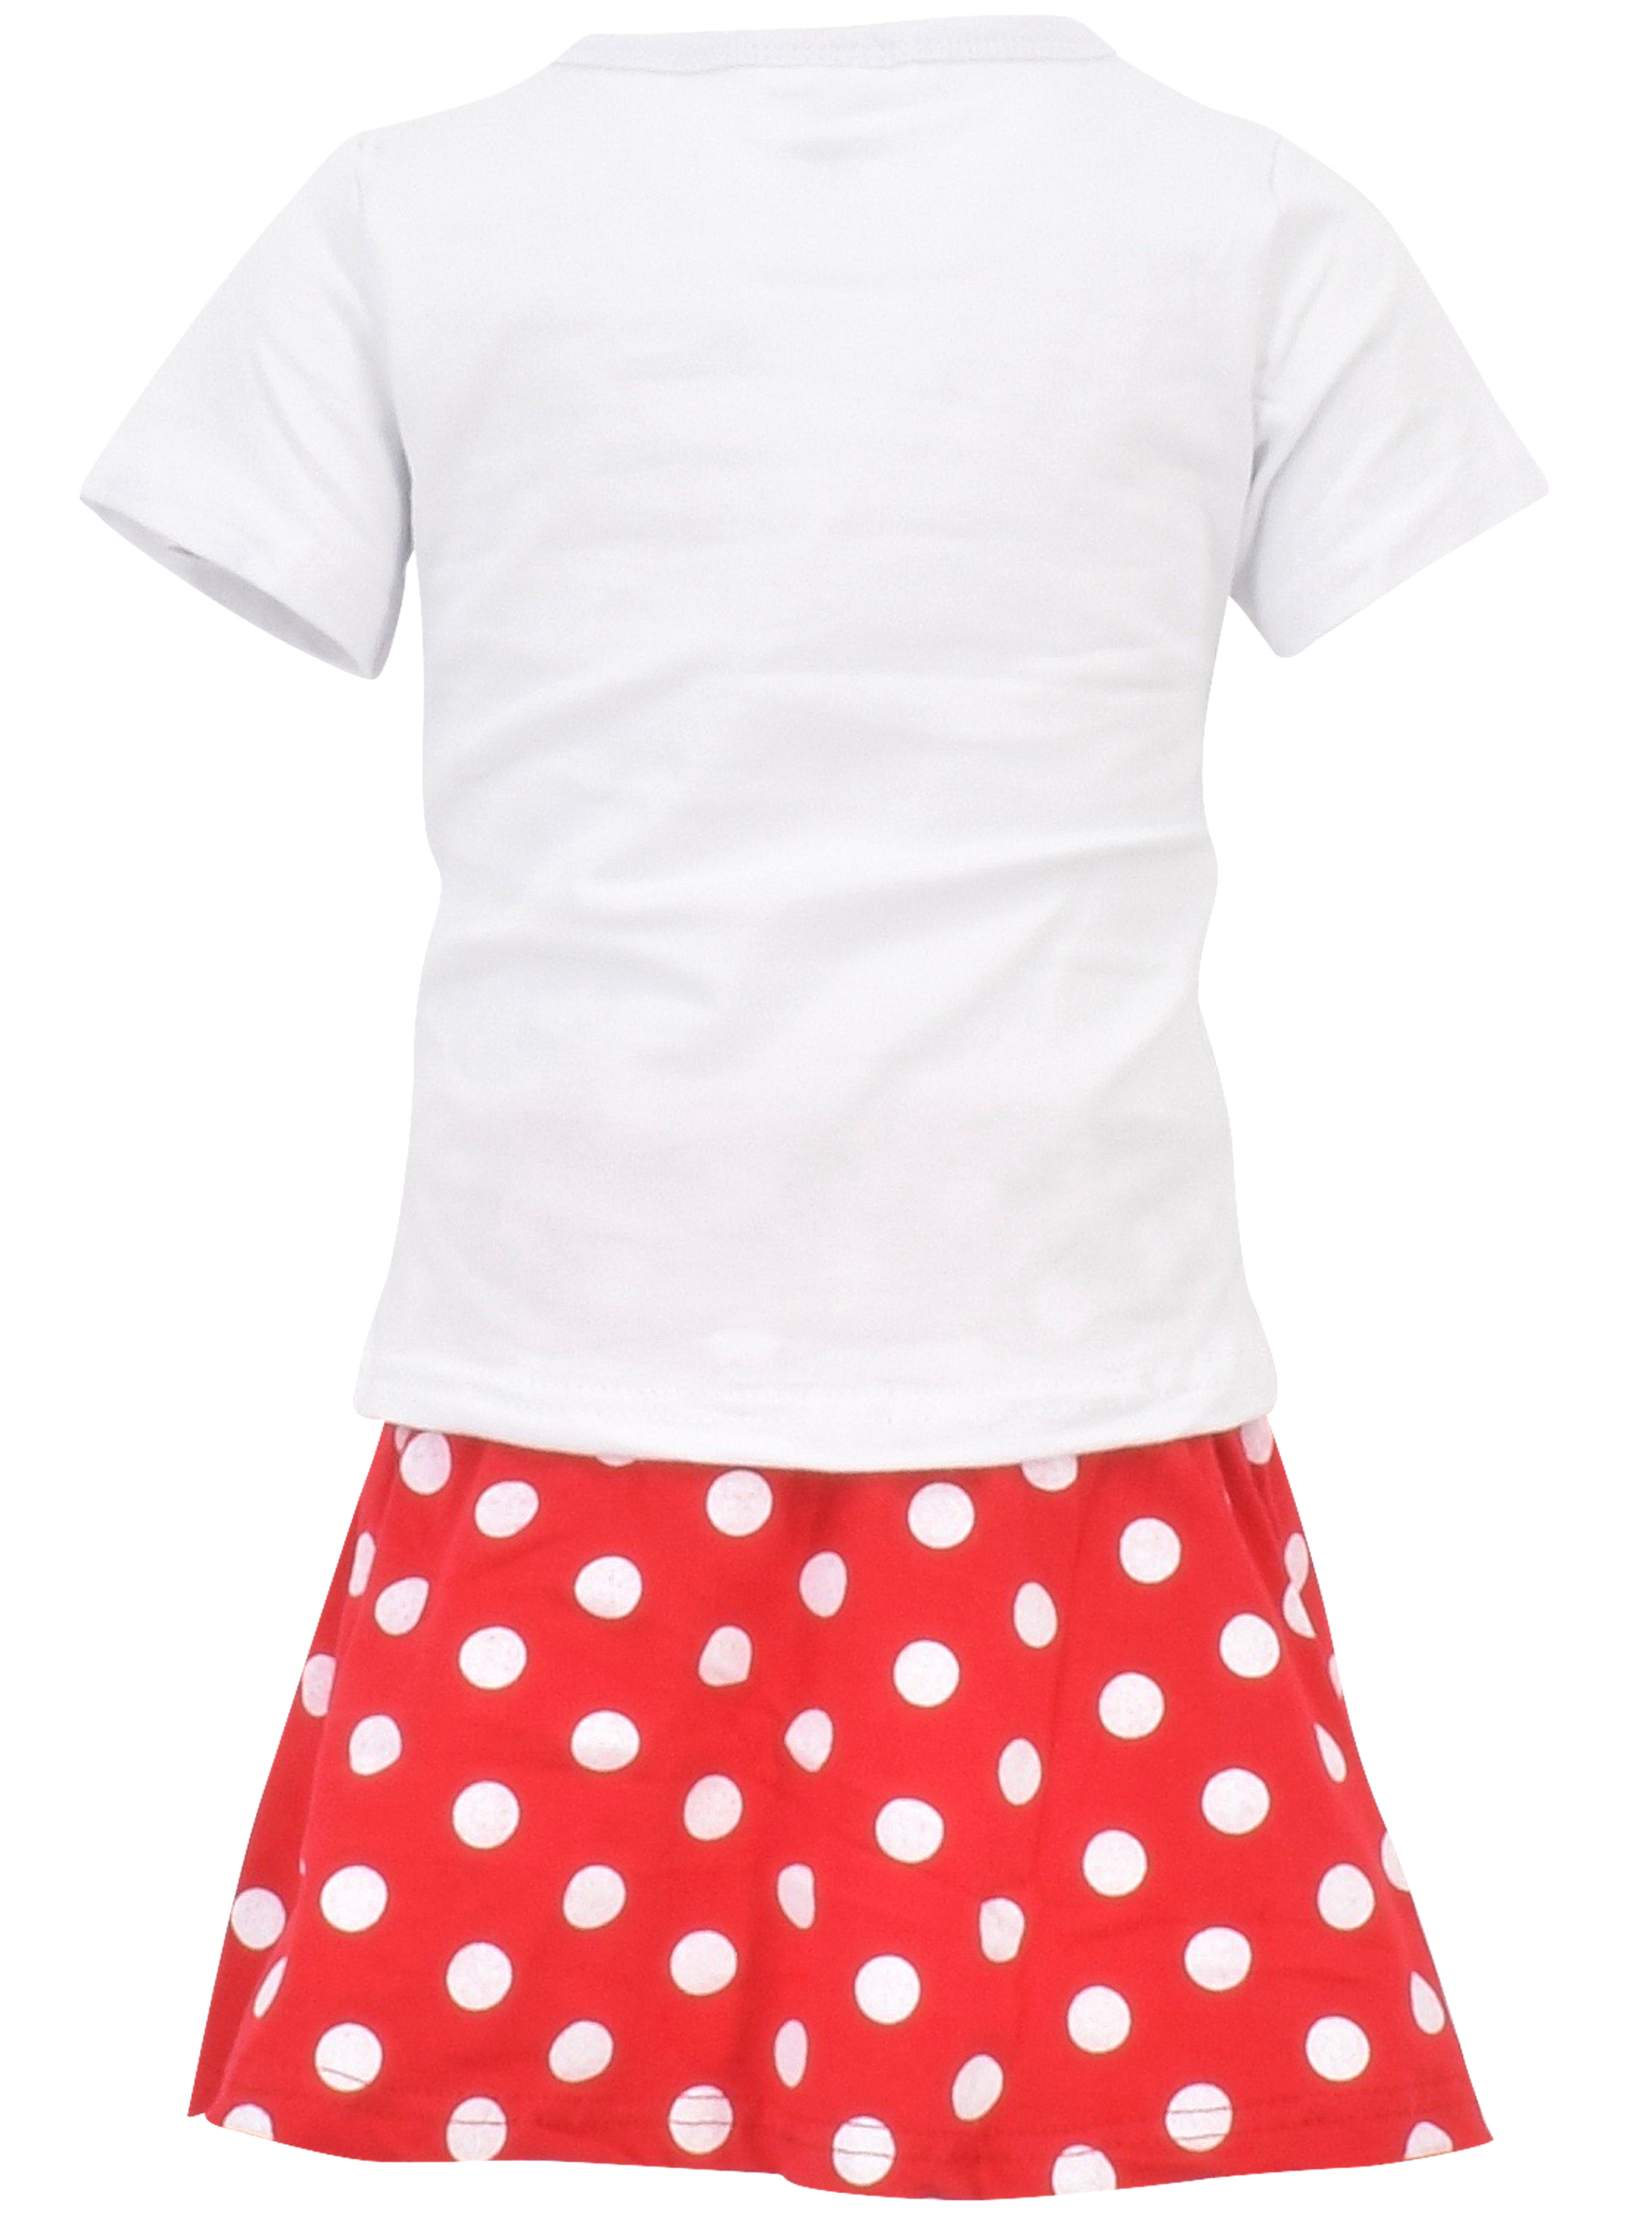 Unique Baby Girls Back to School Apple Skirt Boutique Outfit (5T/L, Red) - image 3 of 4